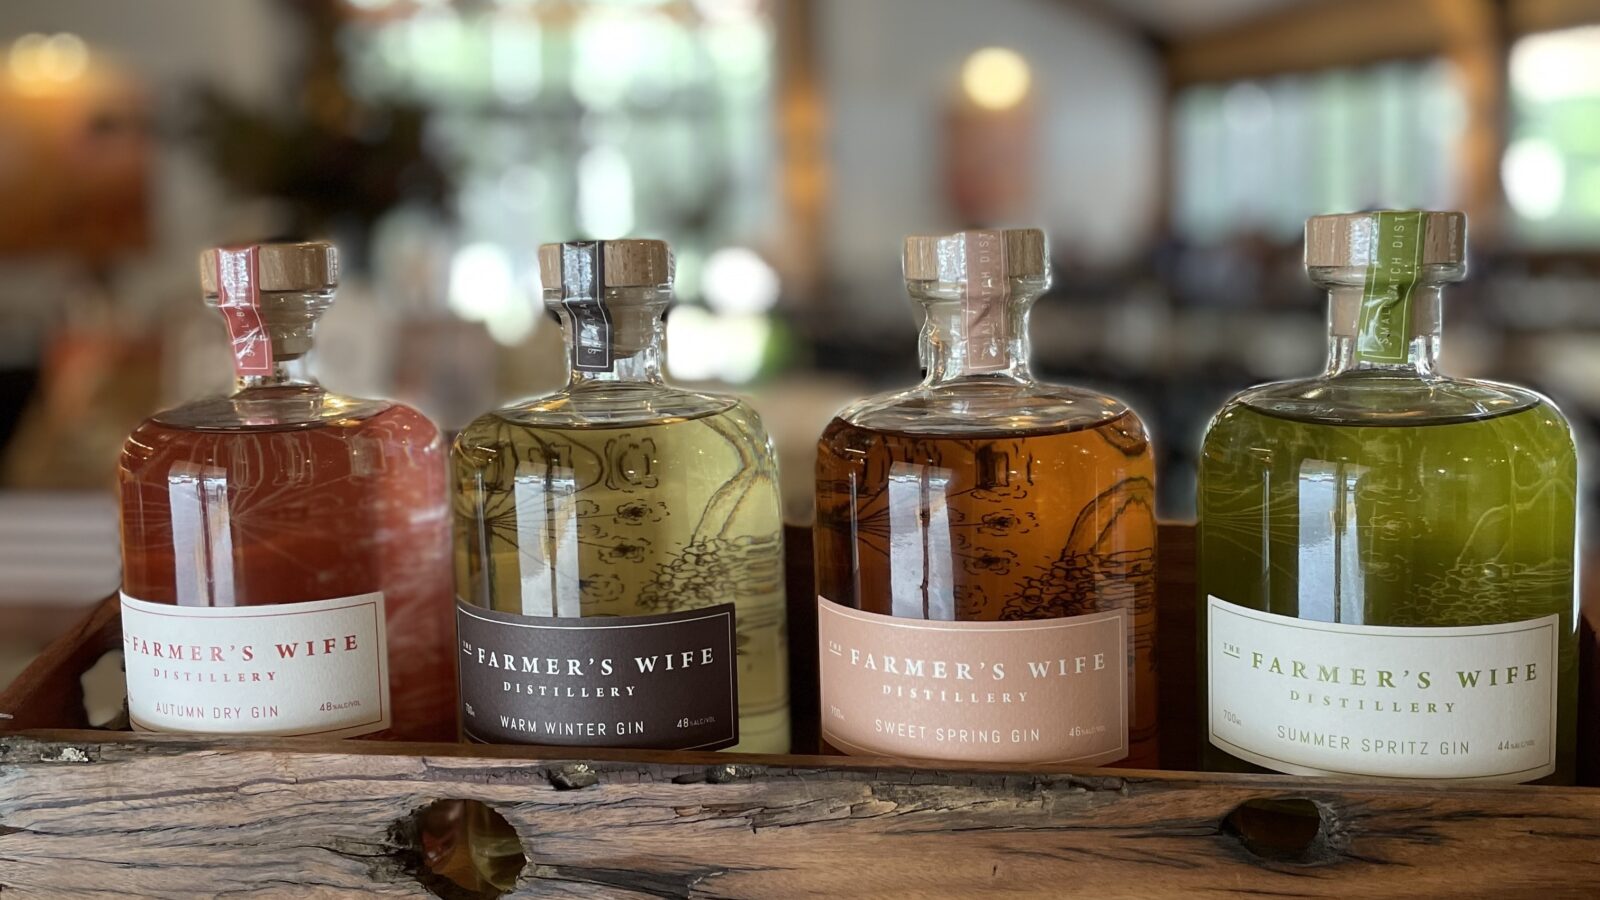 The Farmers Wife Distillery gin selection